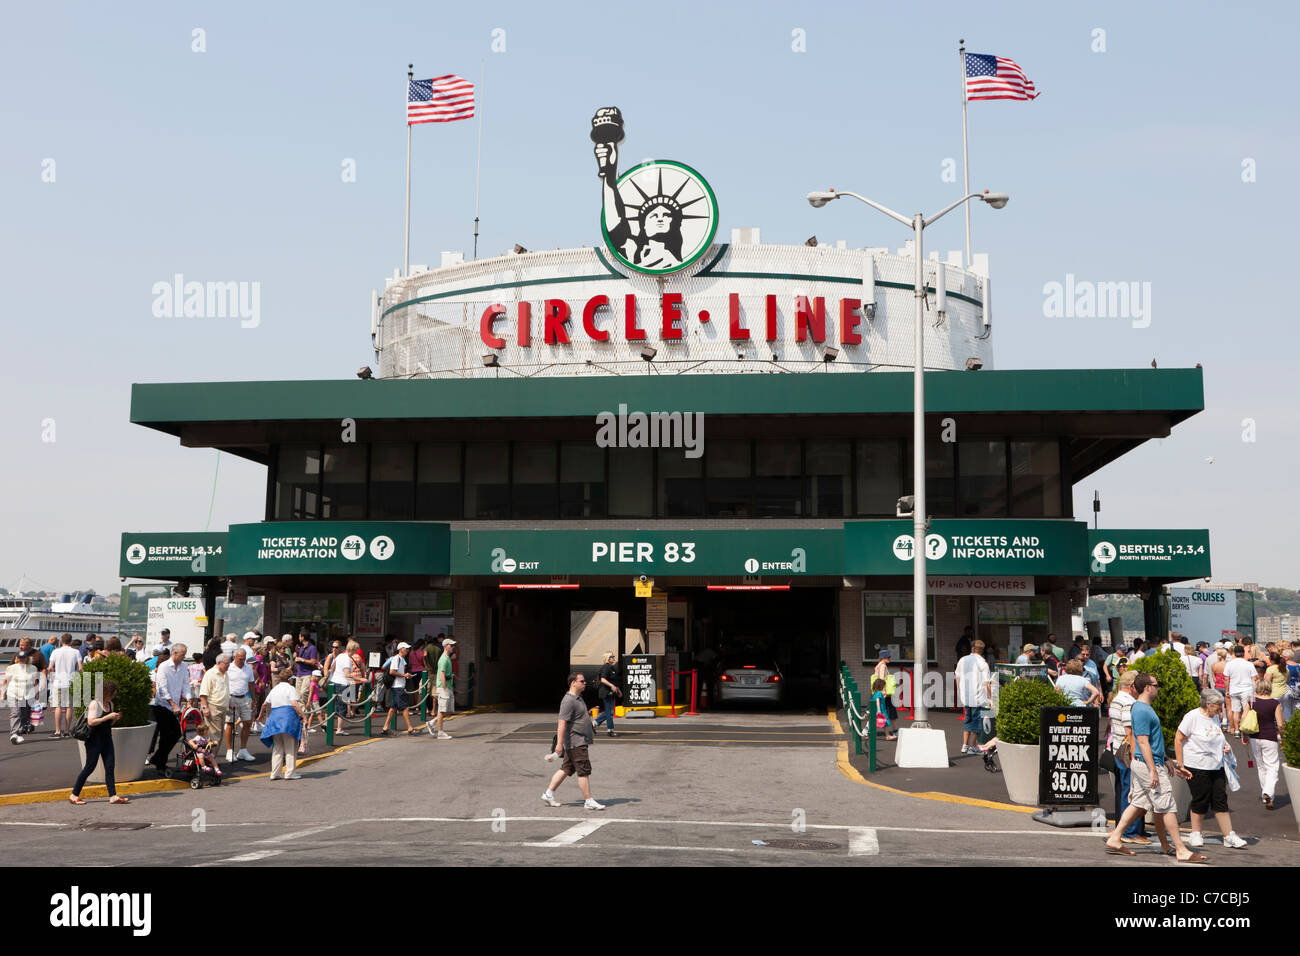 The Circle Line sightseeing cruise building on Pier 83 in New York City. Stock Photo